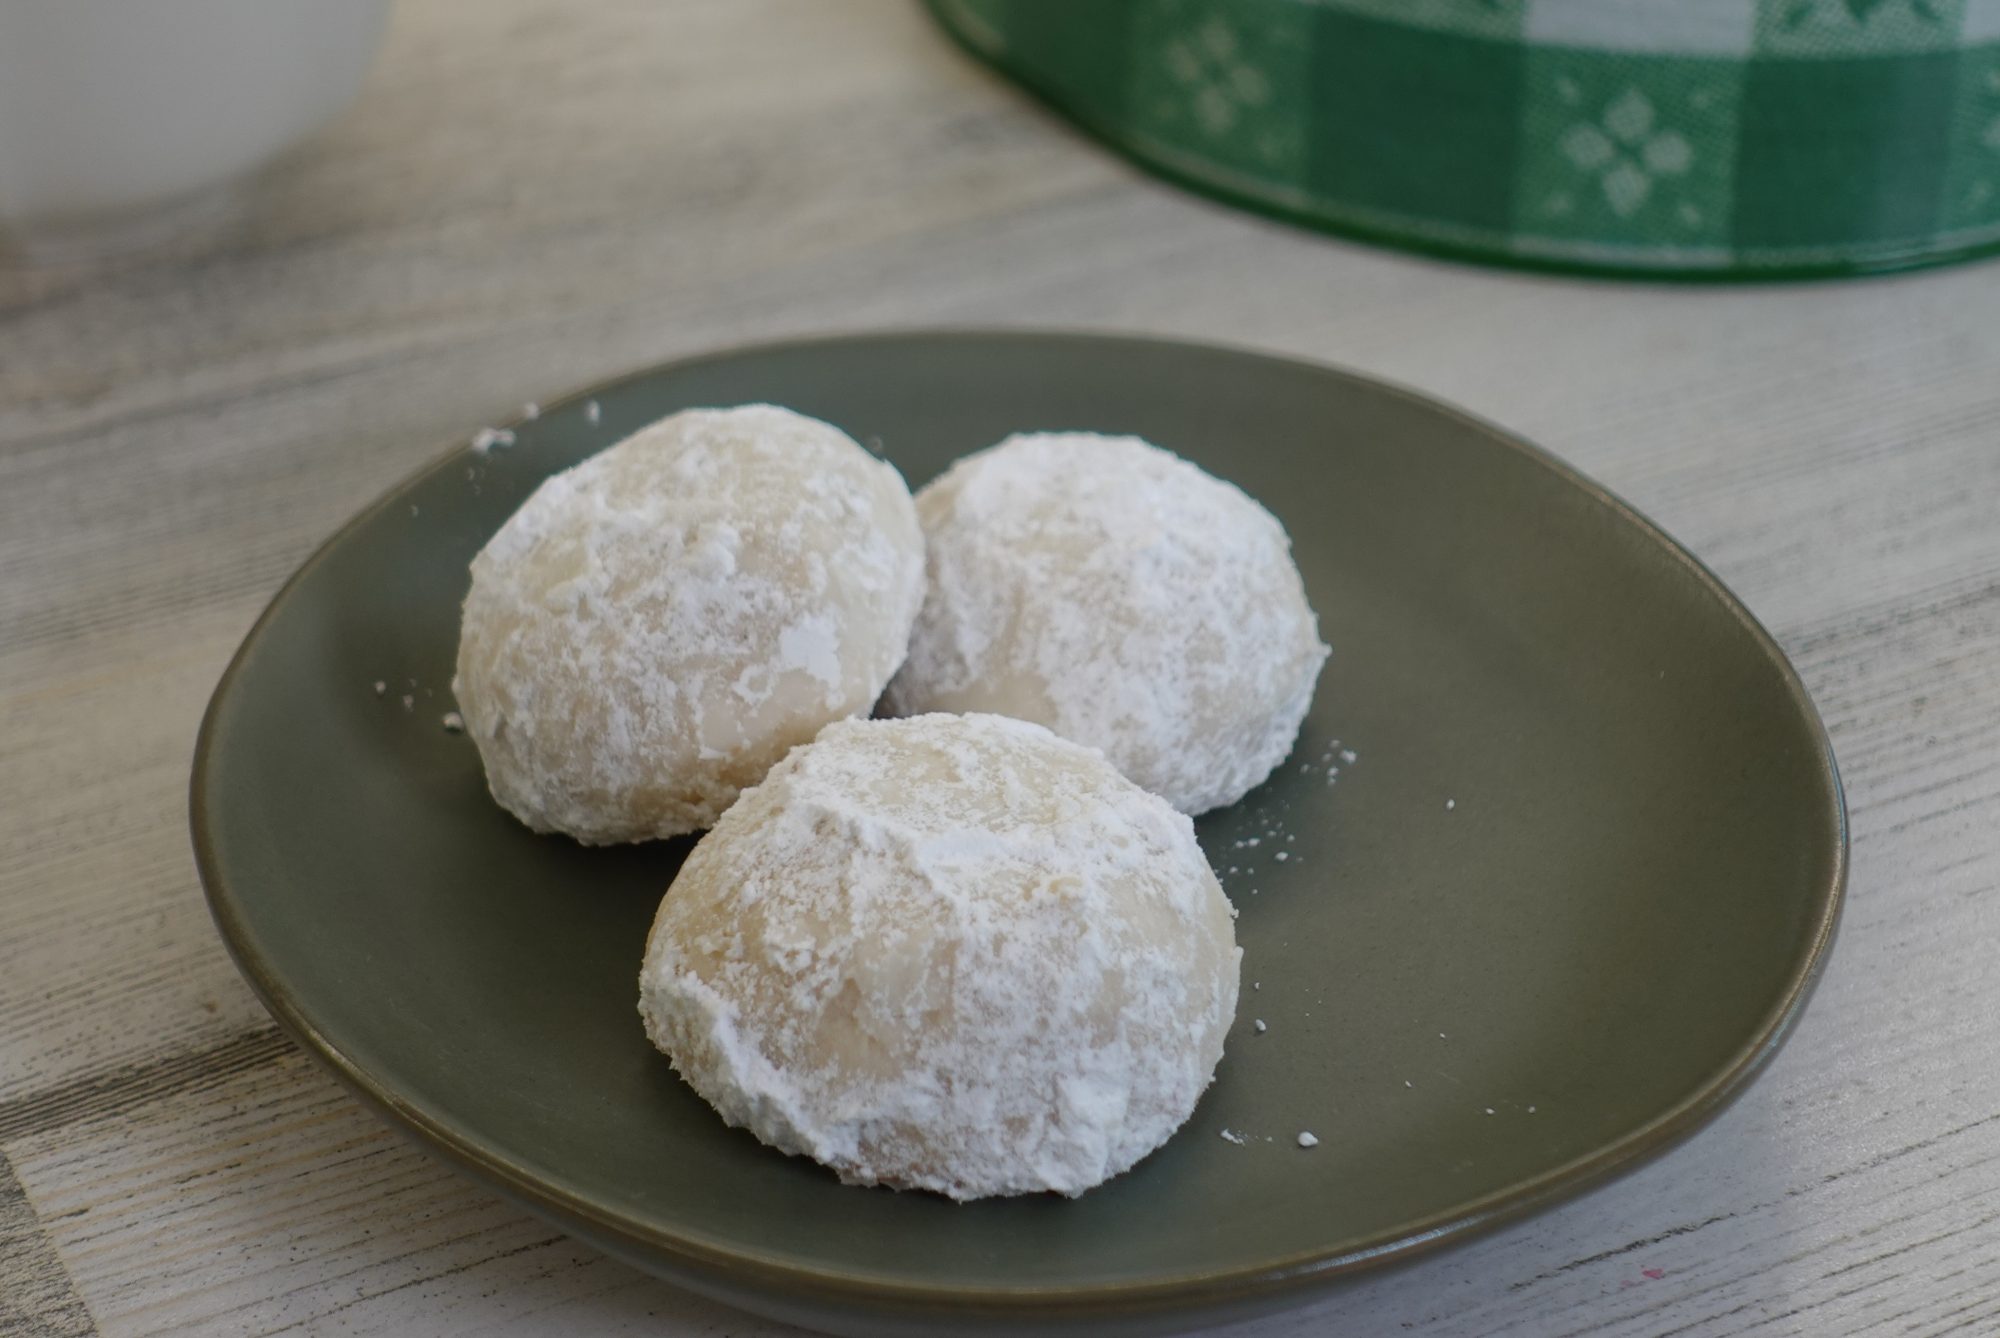 three round powdered sugar-dusted cookies on a plate